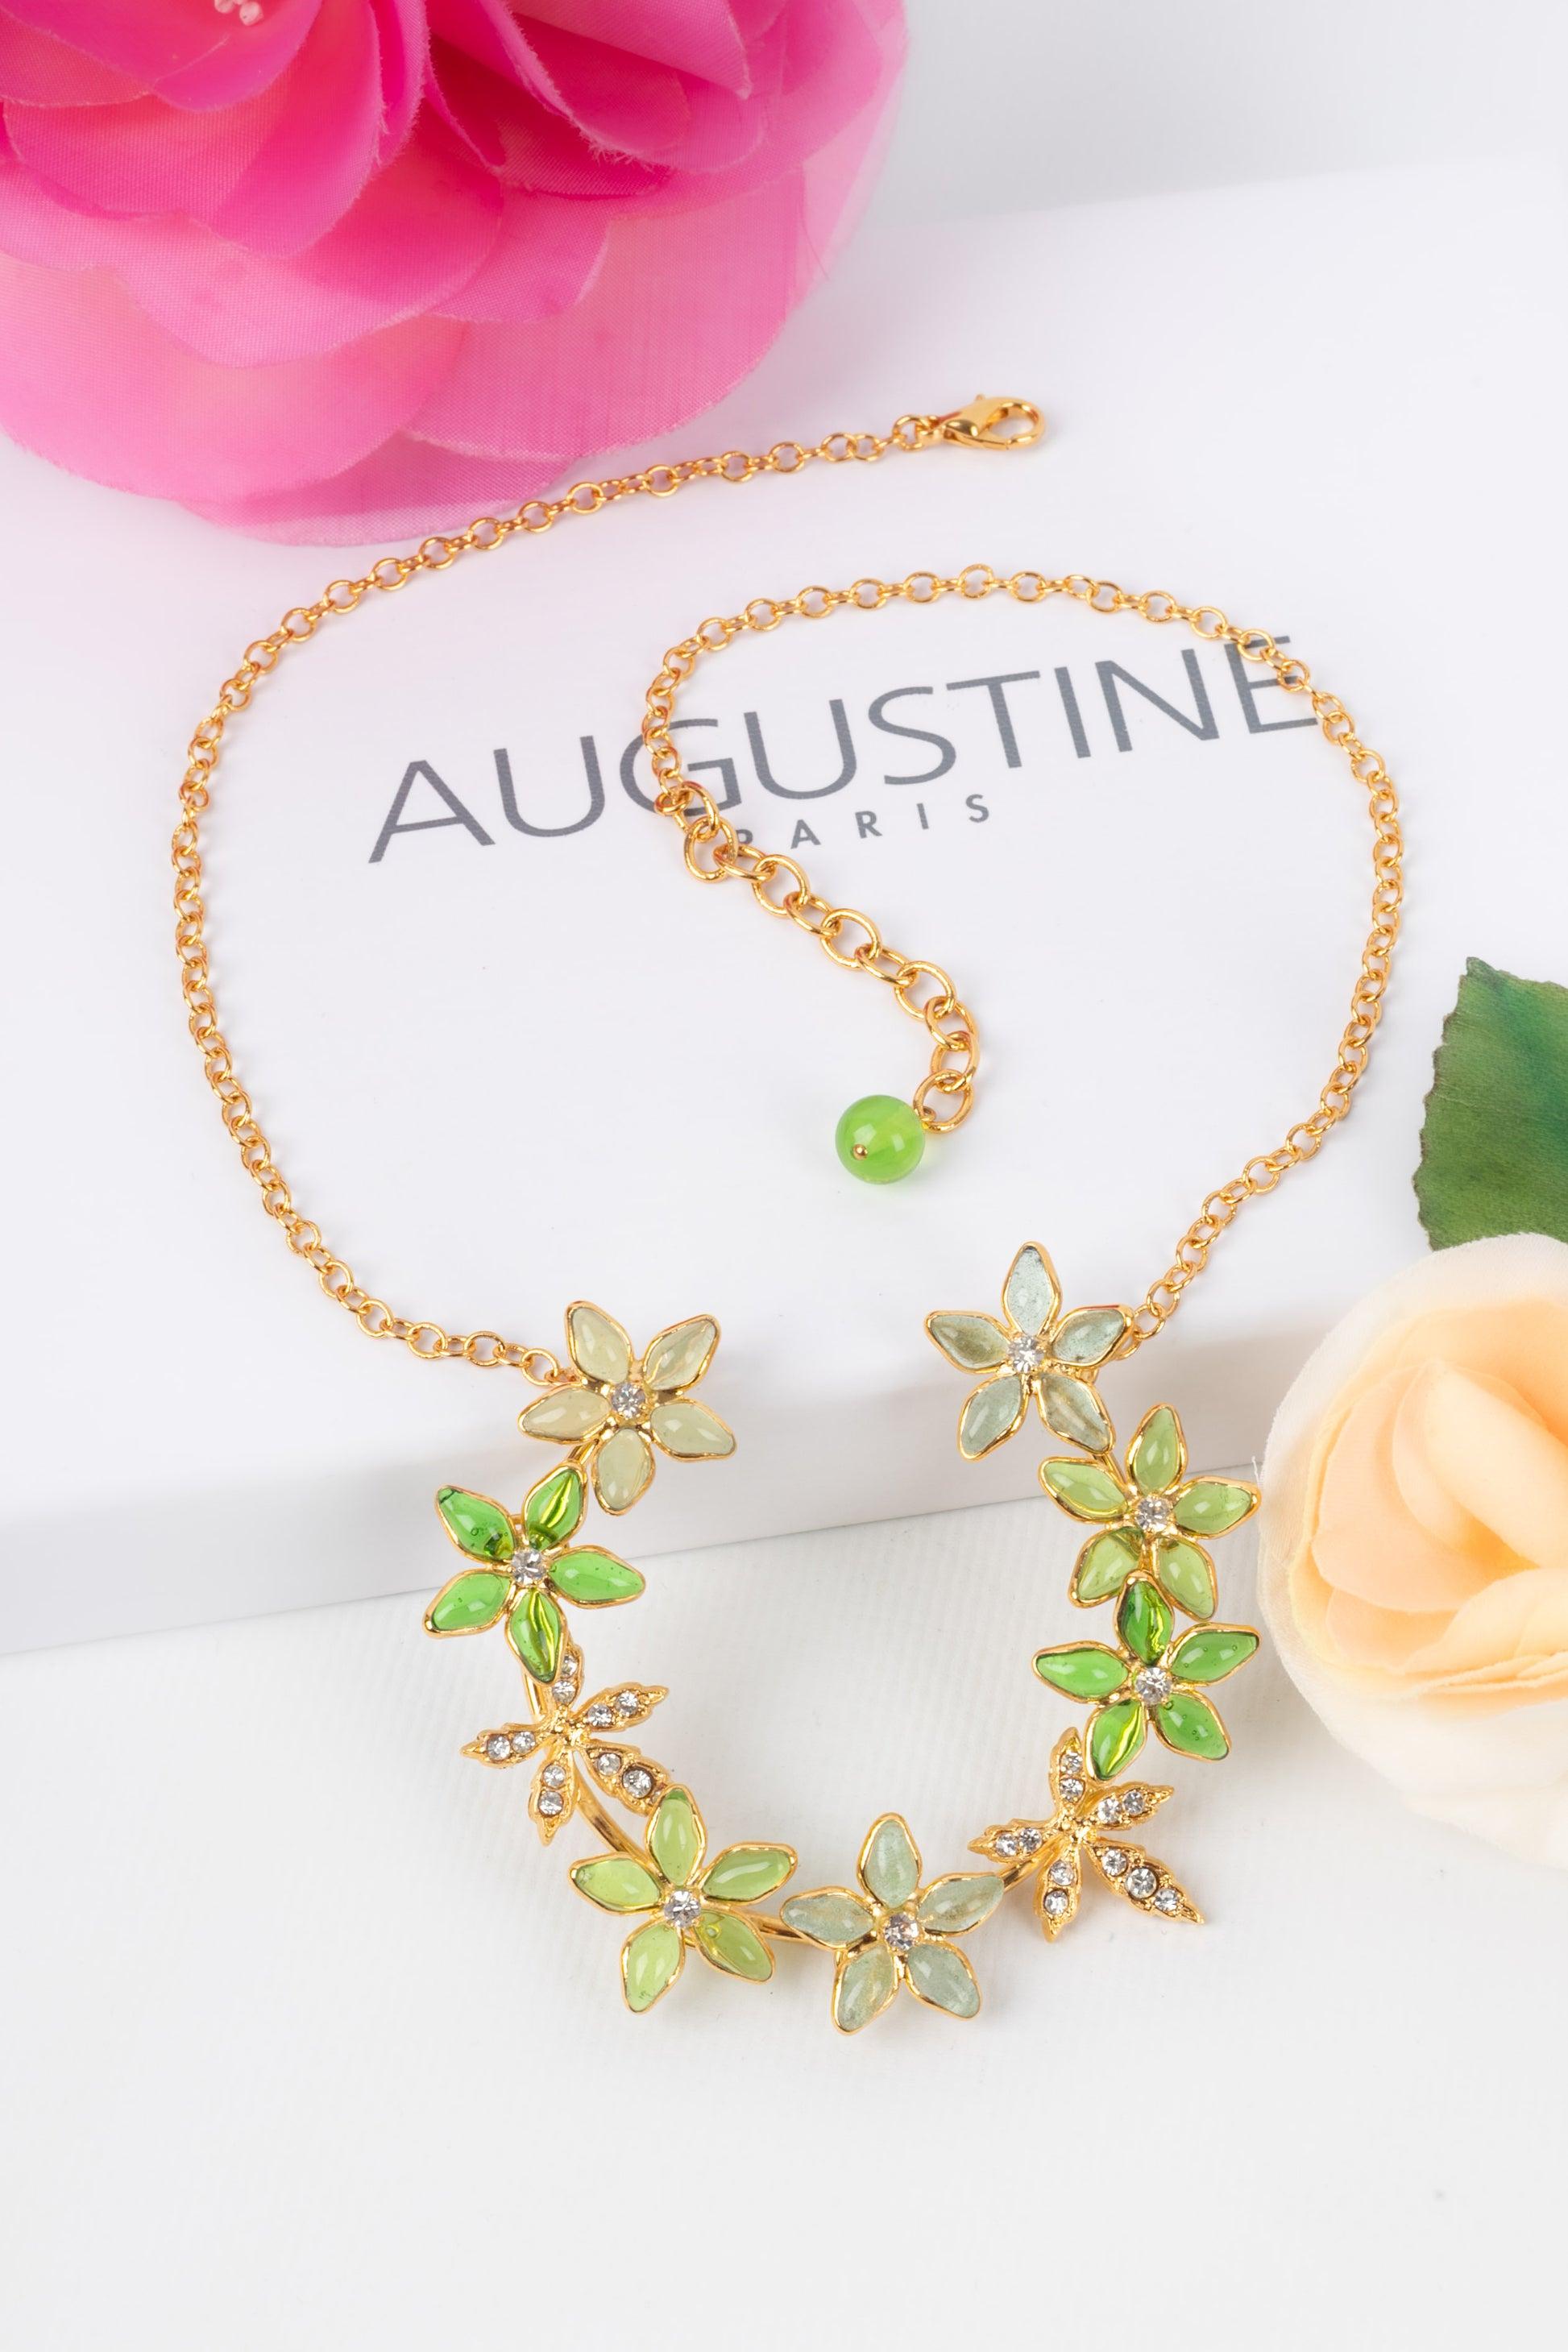 Augustine Golden Metal Necklace with Rhinestones and Glass Paste in Green Tones For Sale 5